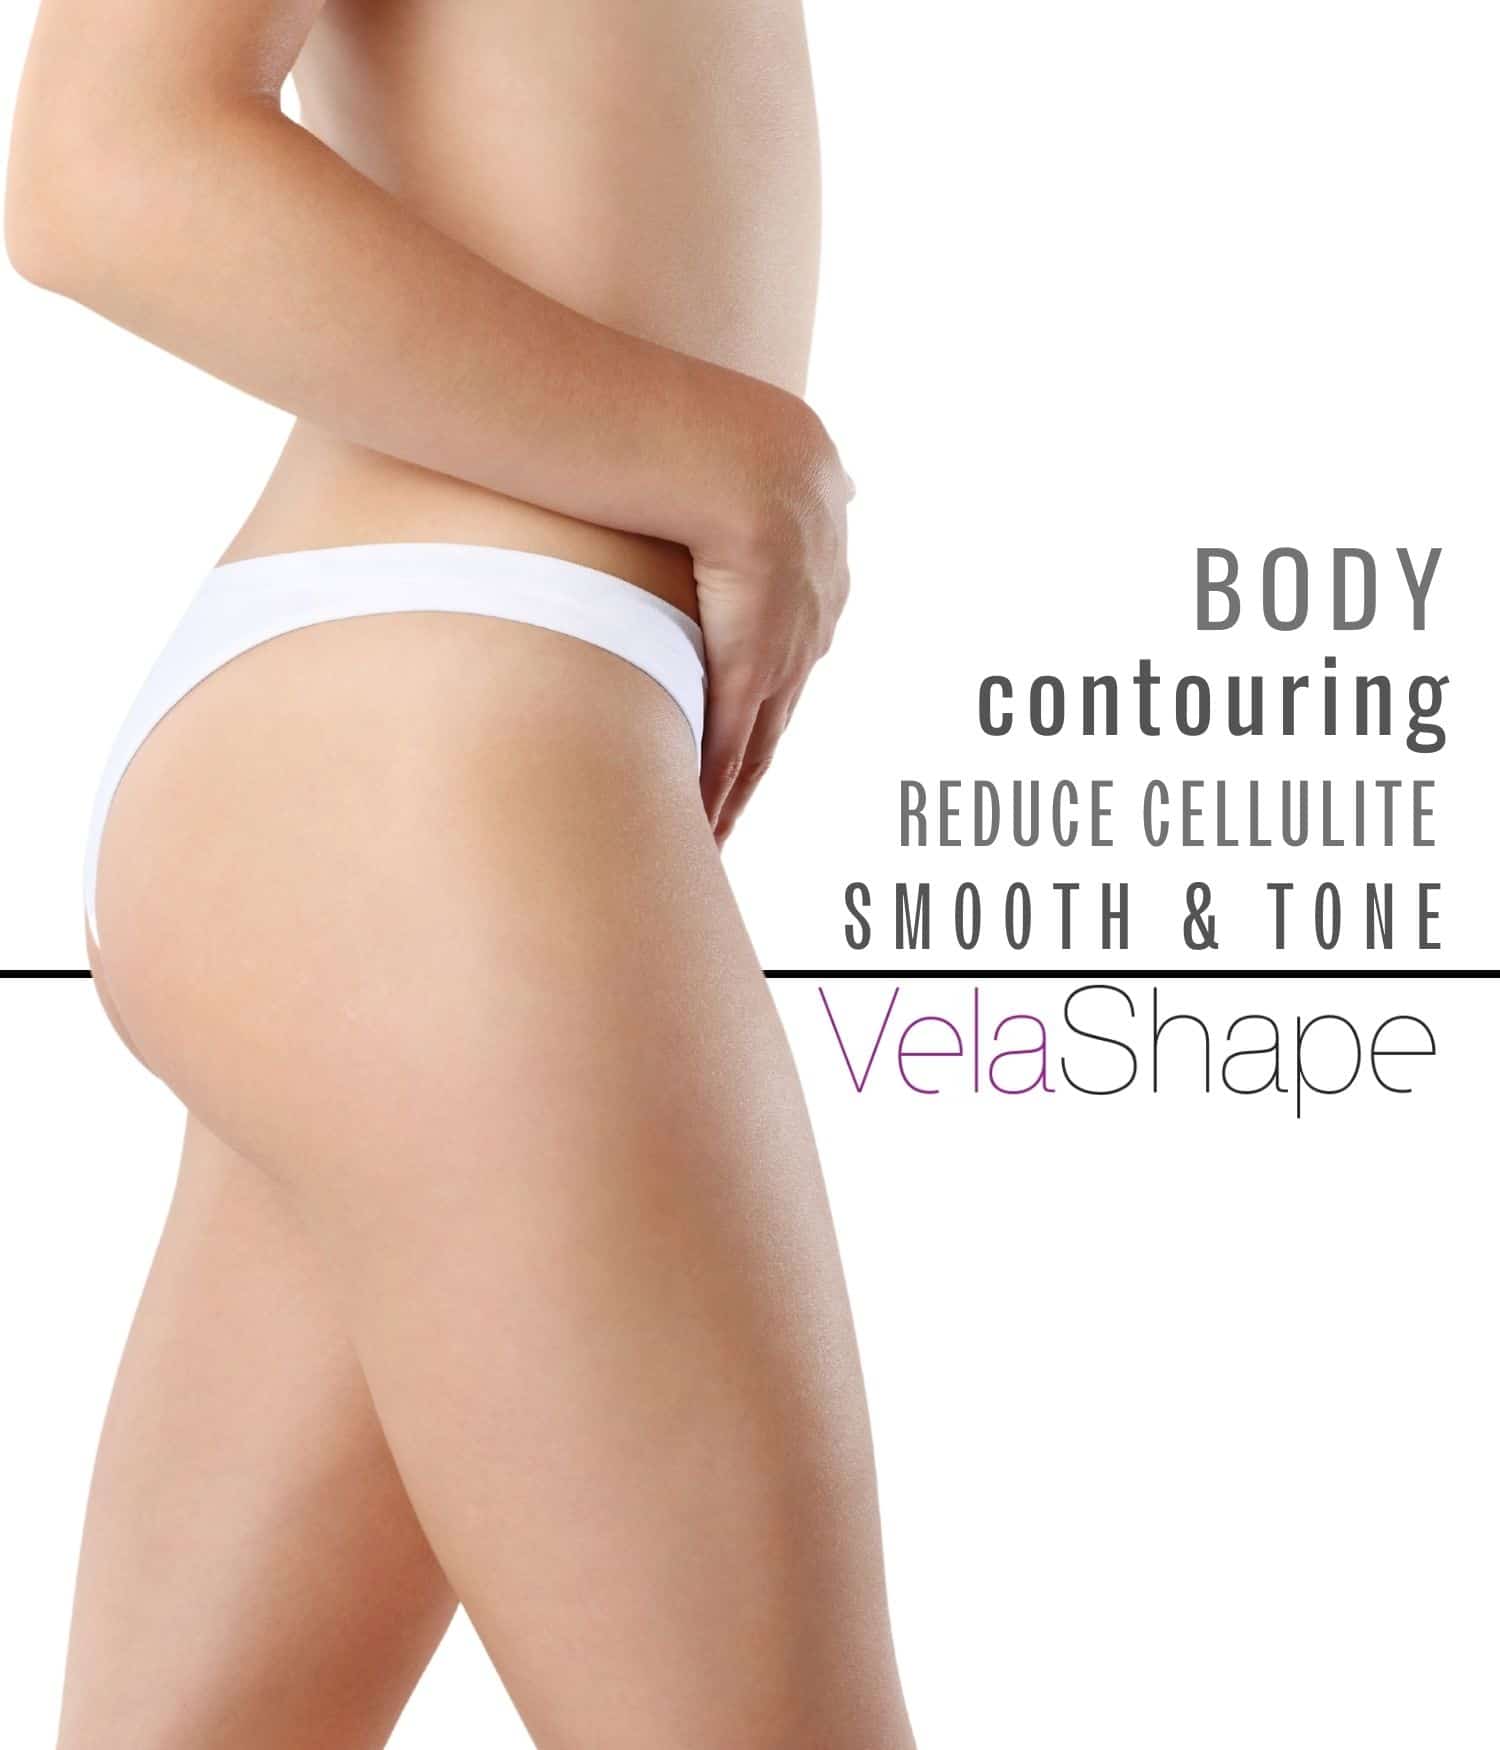 Woman standing to the side showing her contoured body and cellulite reduction after non-invasive after VelaShape treatment.